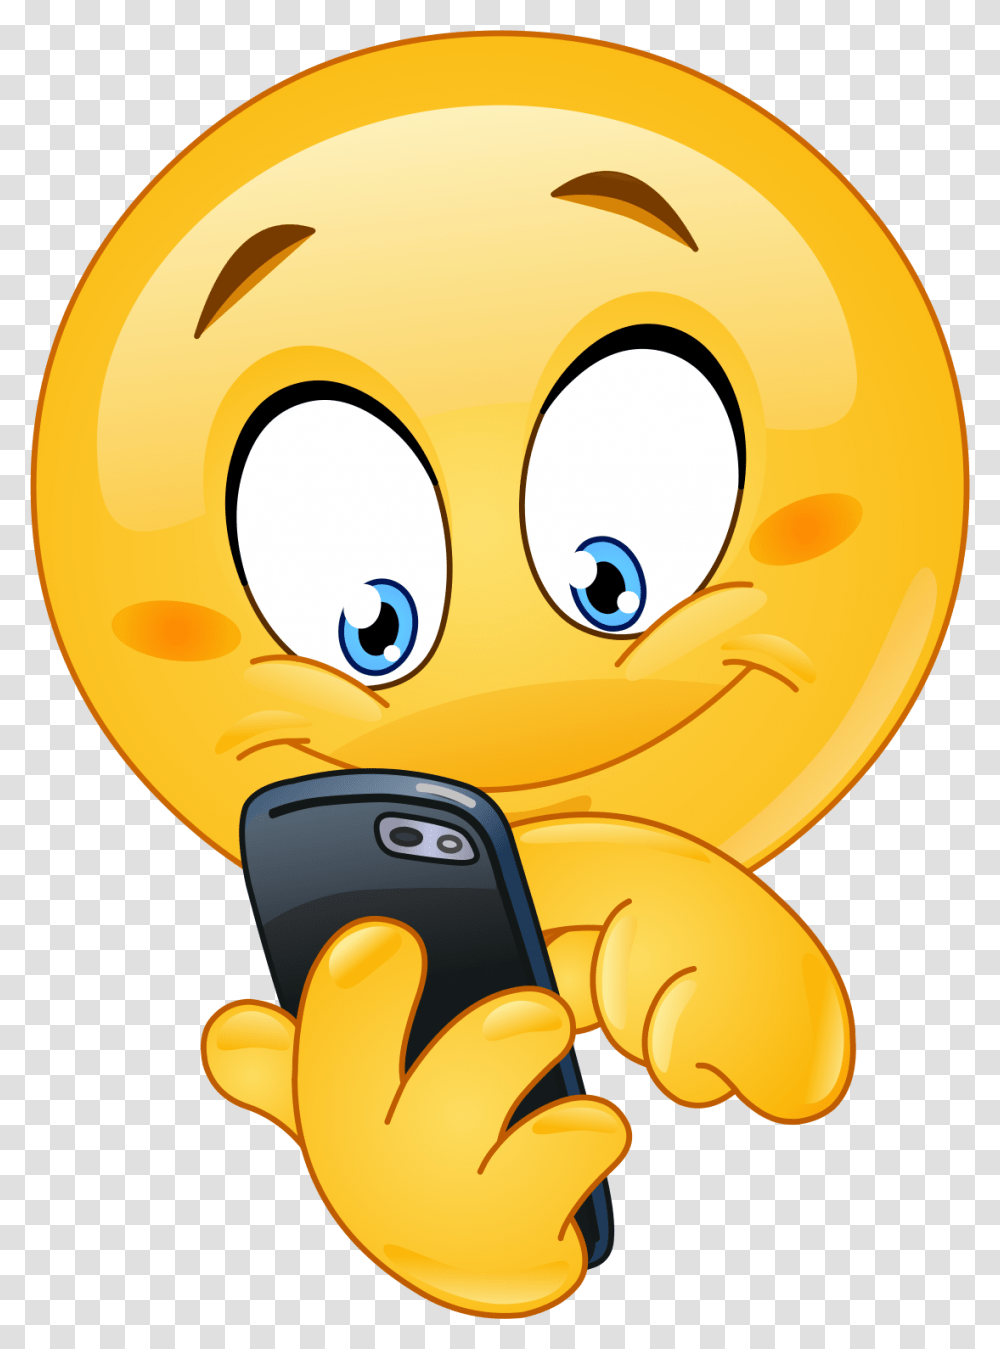 Cell Phone Emoji 209 Decal Emoji On The Phone, Electronics, Mobile Phone, Texting, Hand-Held Computer Transparent Png